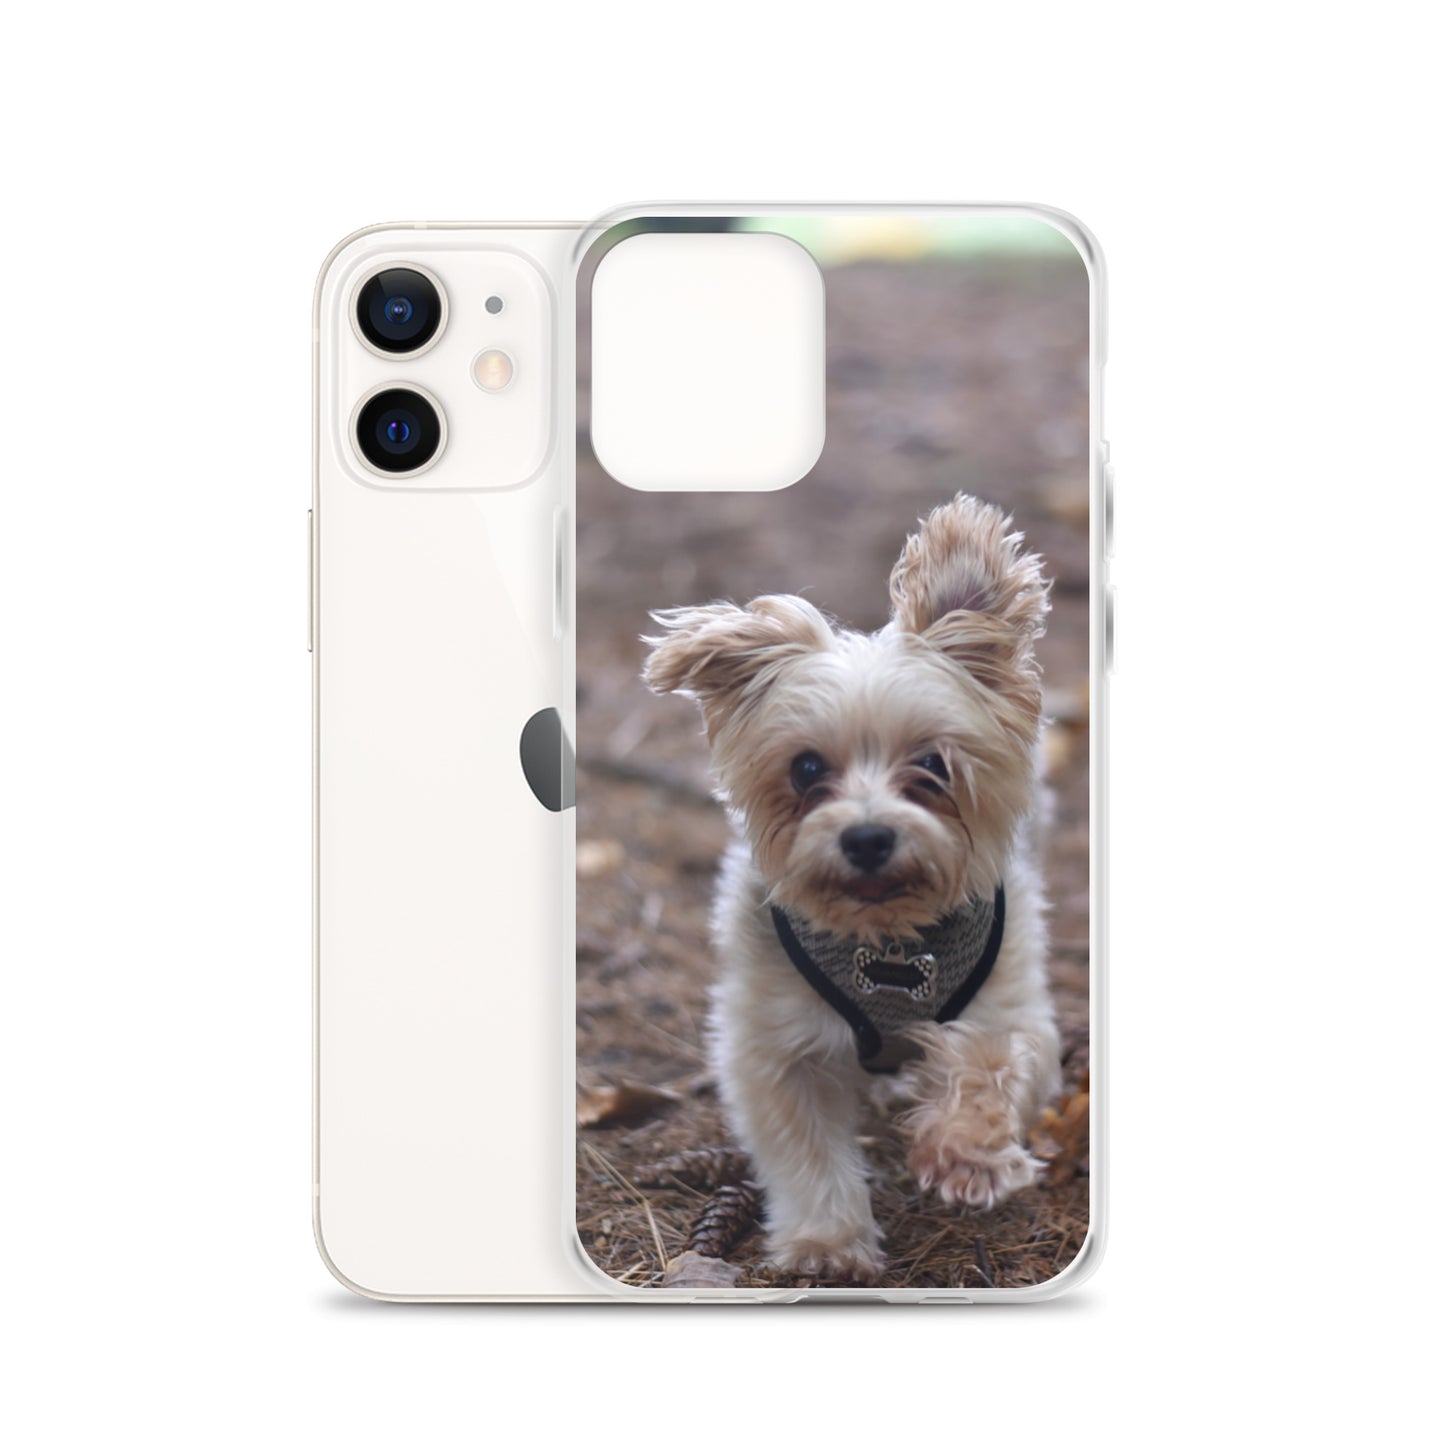 iPhone Case with Cute Hiking Pup